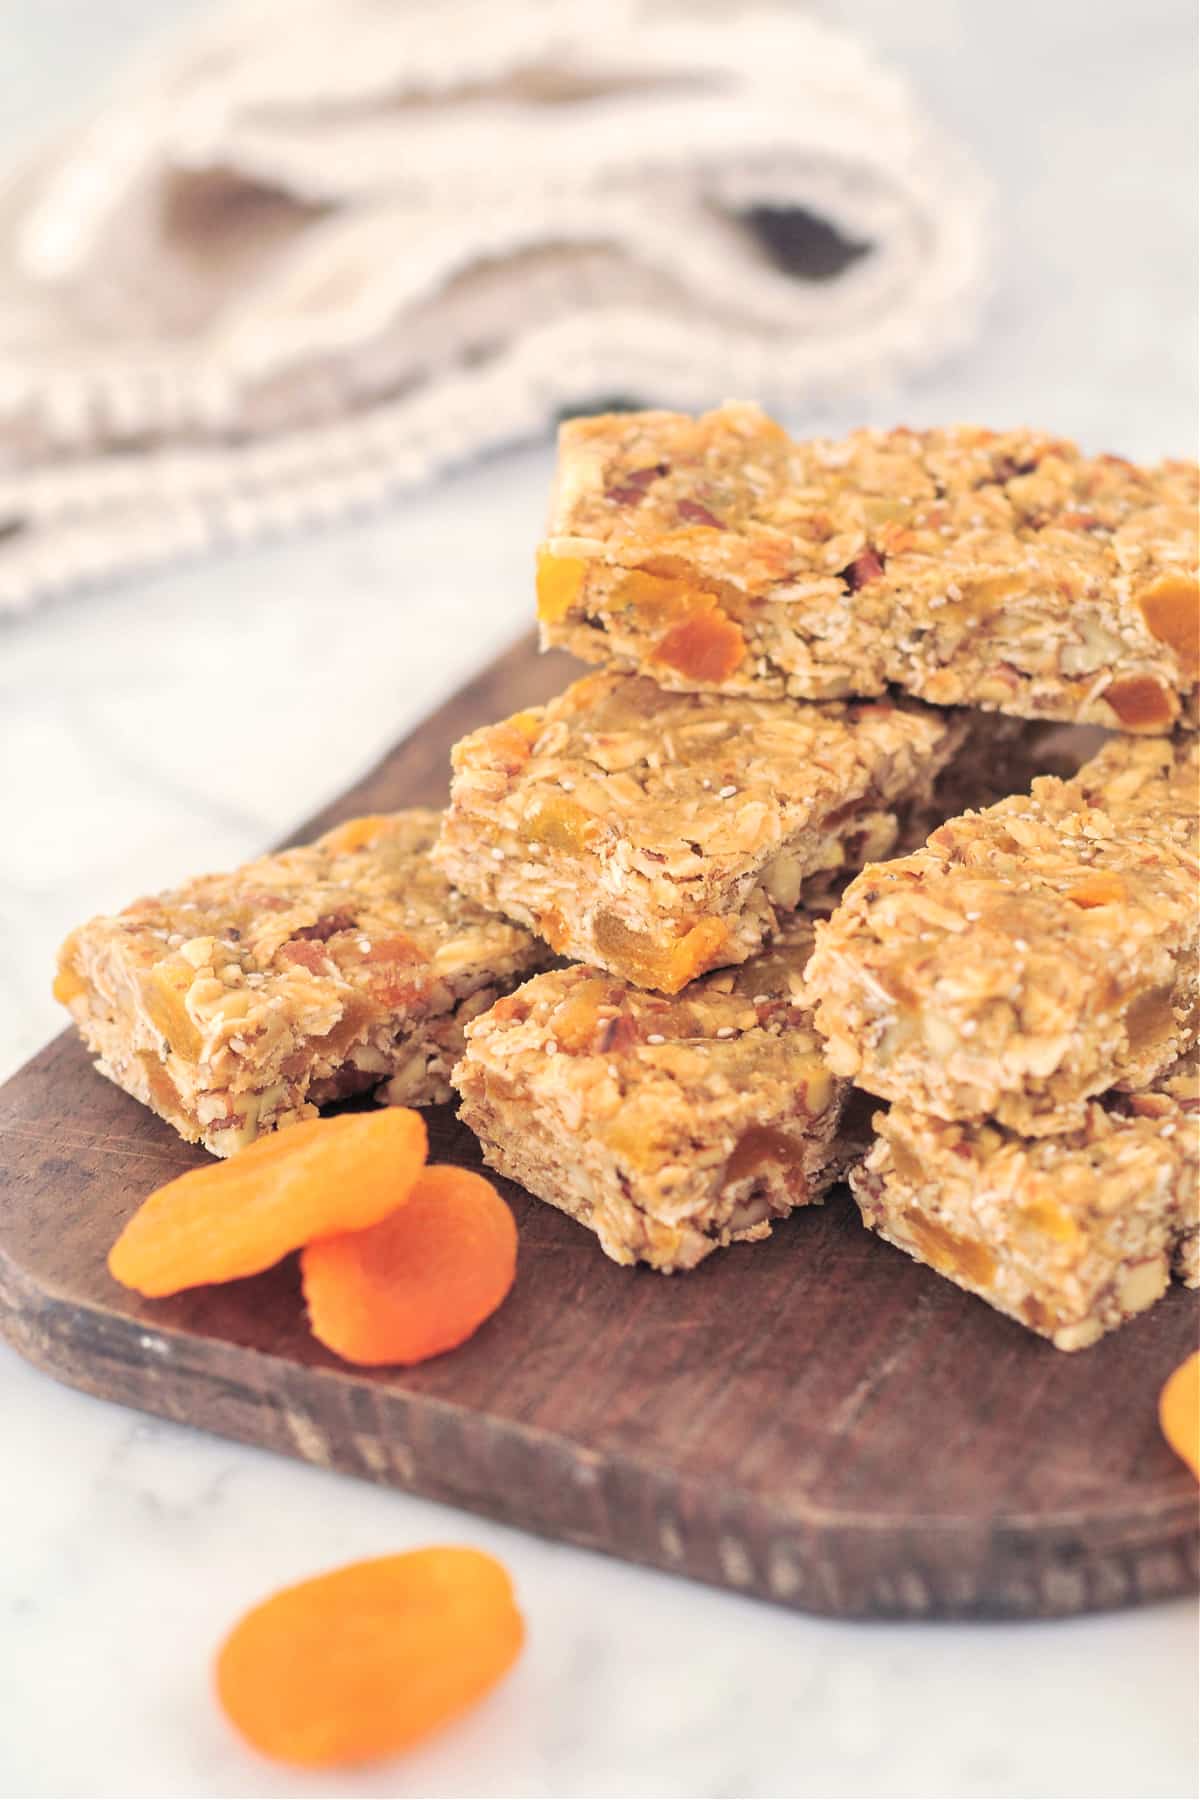 Several apricot almond granola bars are stacked on a dark wooden board, with two dried apricots.